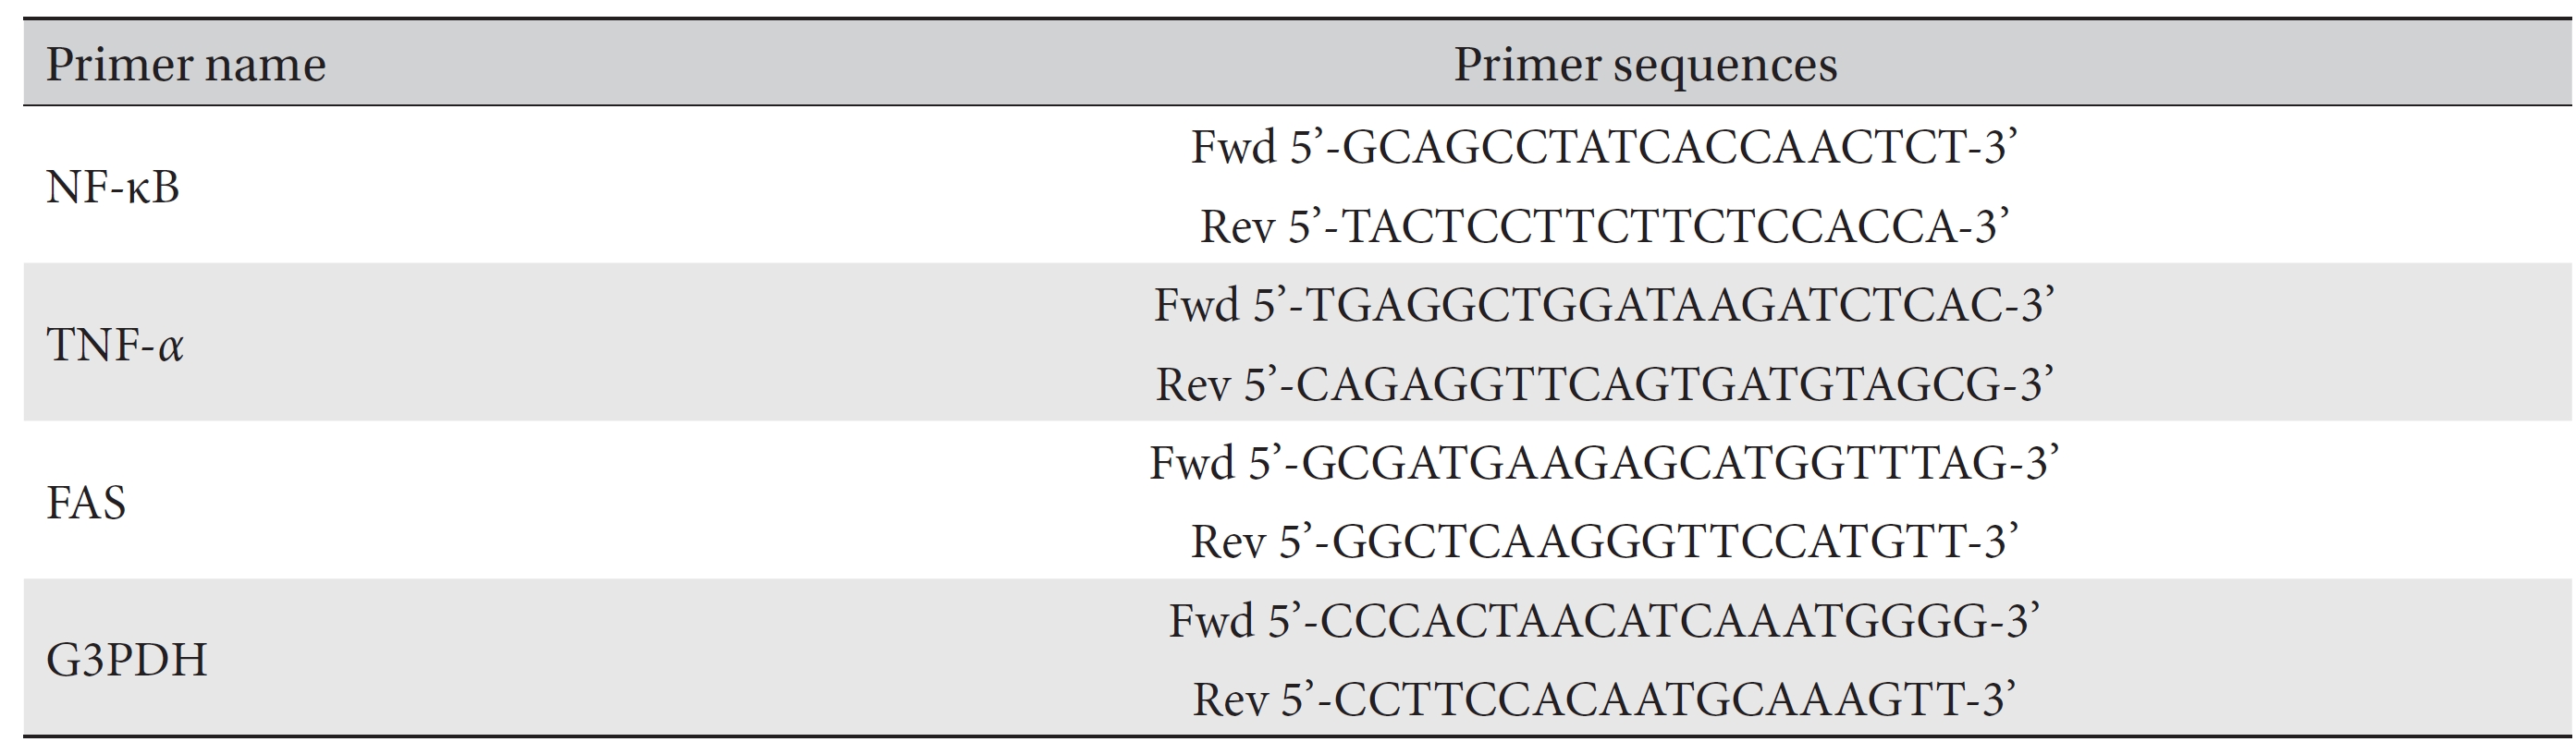 Primer sequences used for the study of RT-PCR